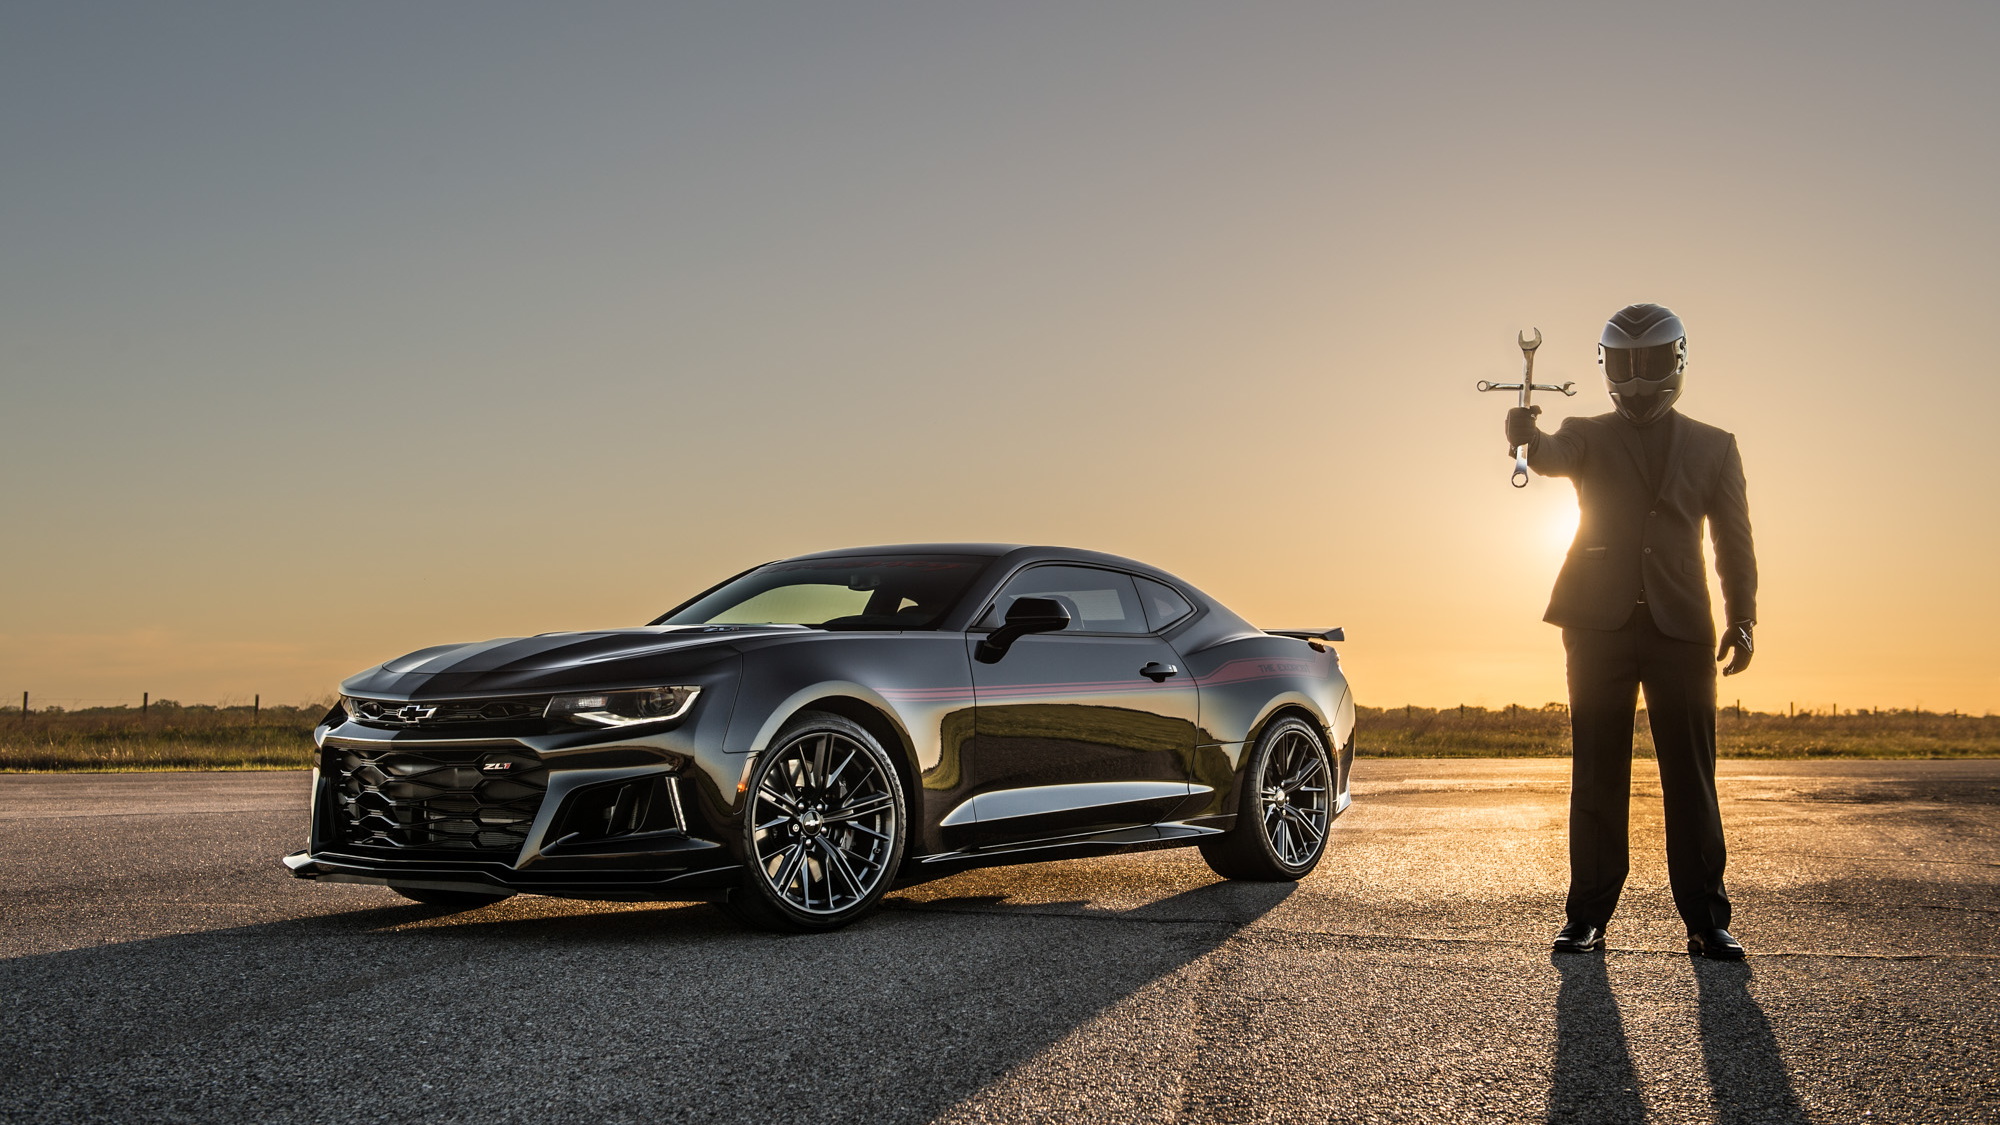 Hennessey answers the Demon’s call with 1,000hp The Exorcist Camaro ZL1